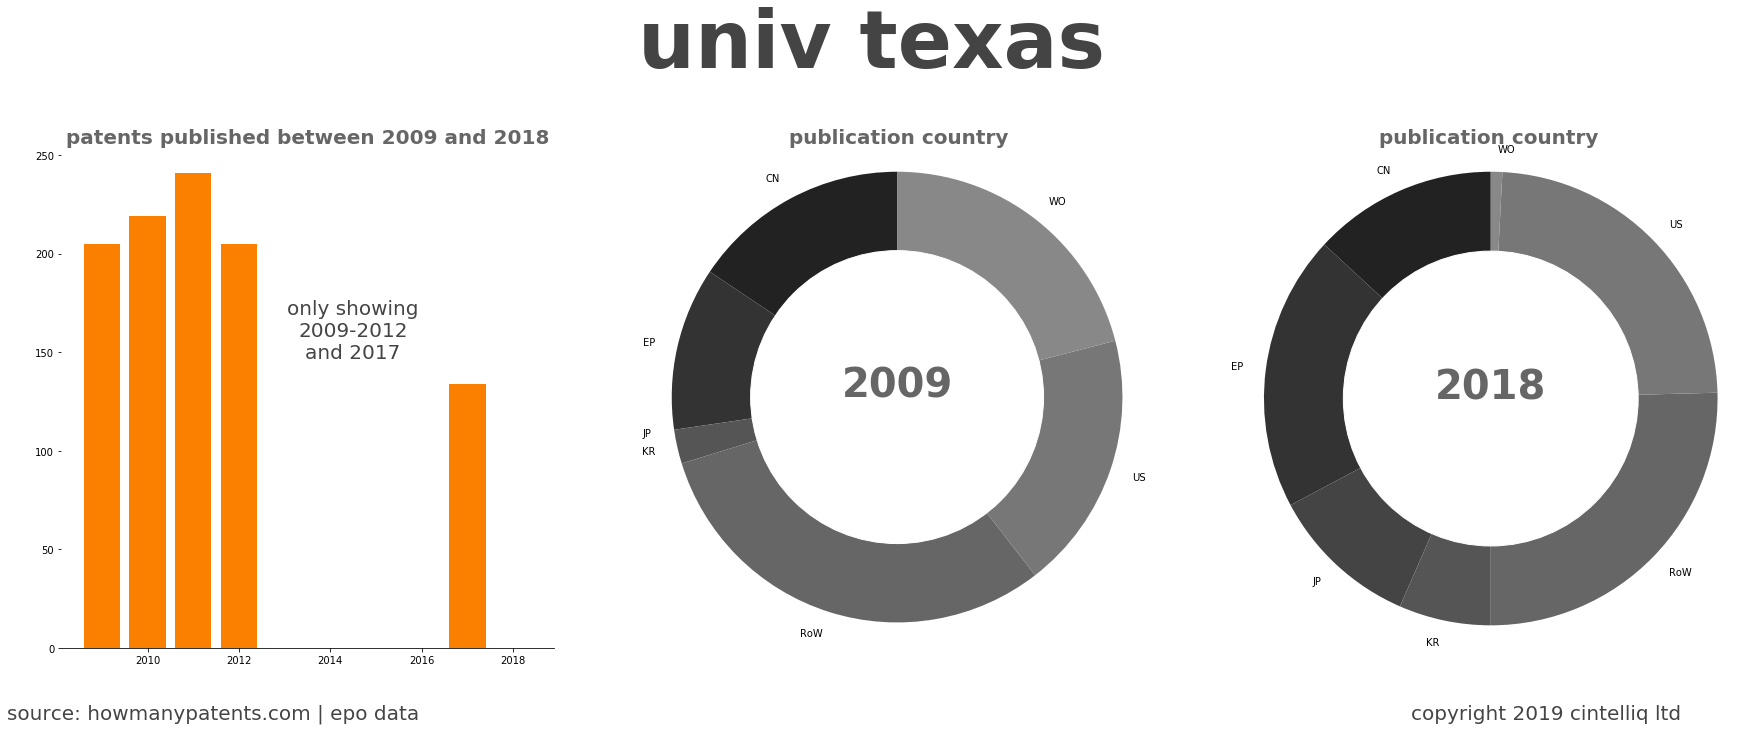 summary of patents for Univ Texas